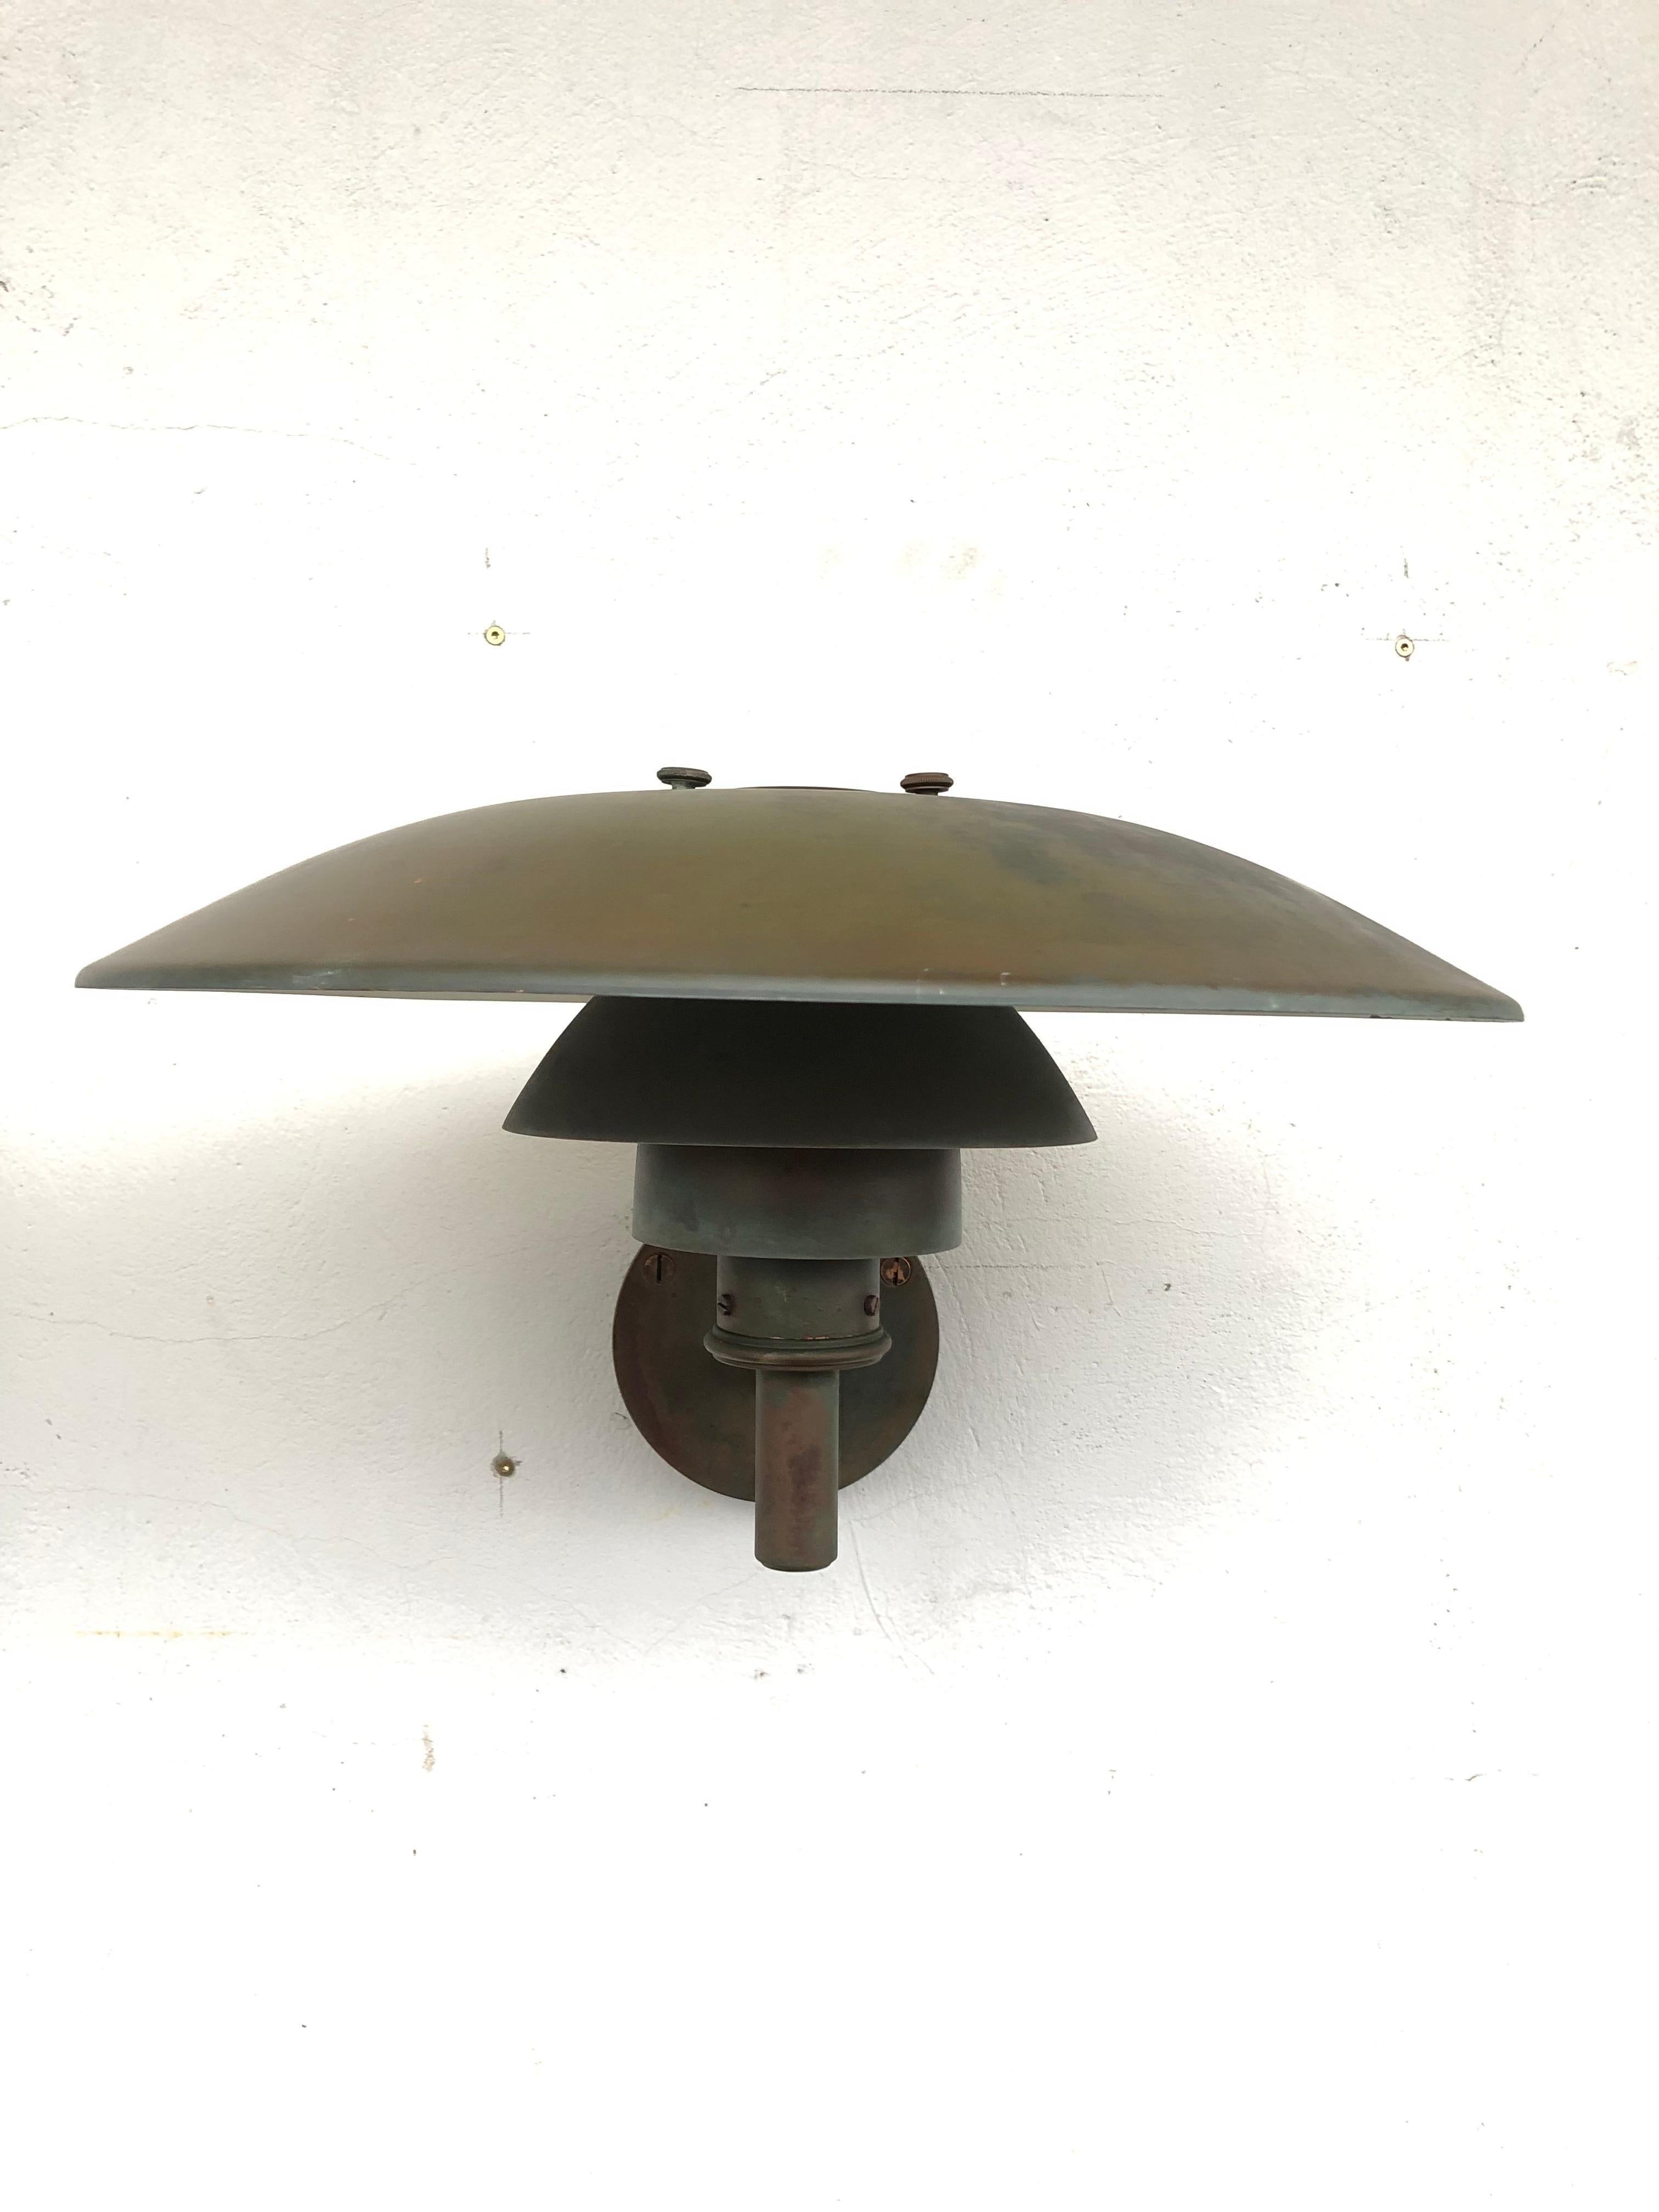 Danish Pair of Iconic Poul Henningsen Copper Wall Lamps by Louis Poulsen of DK